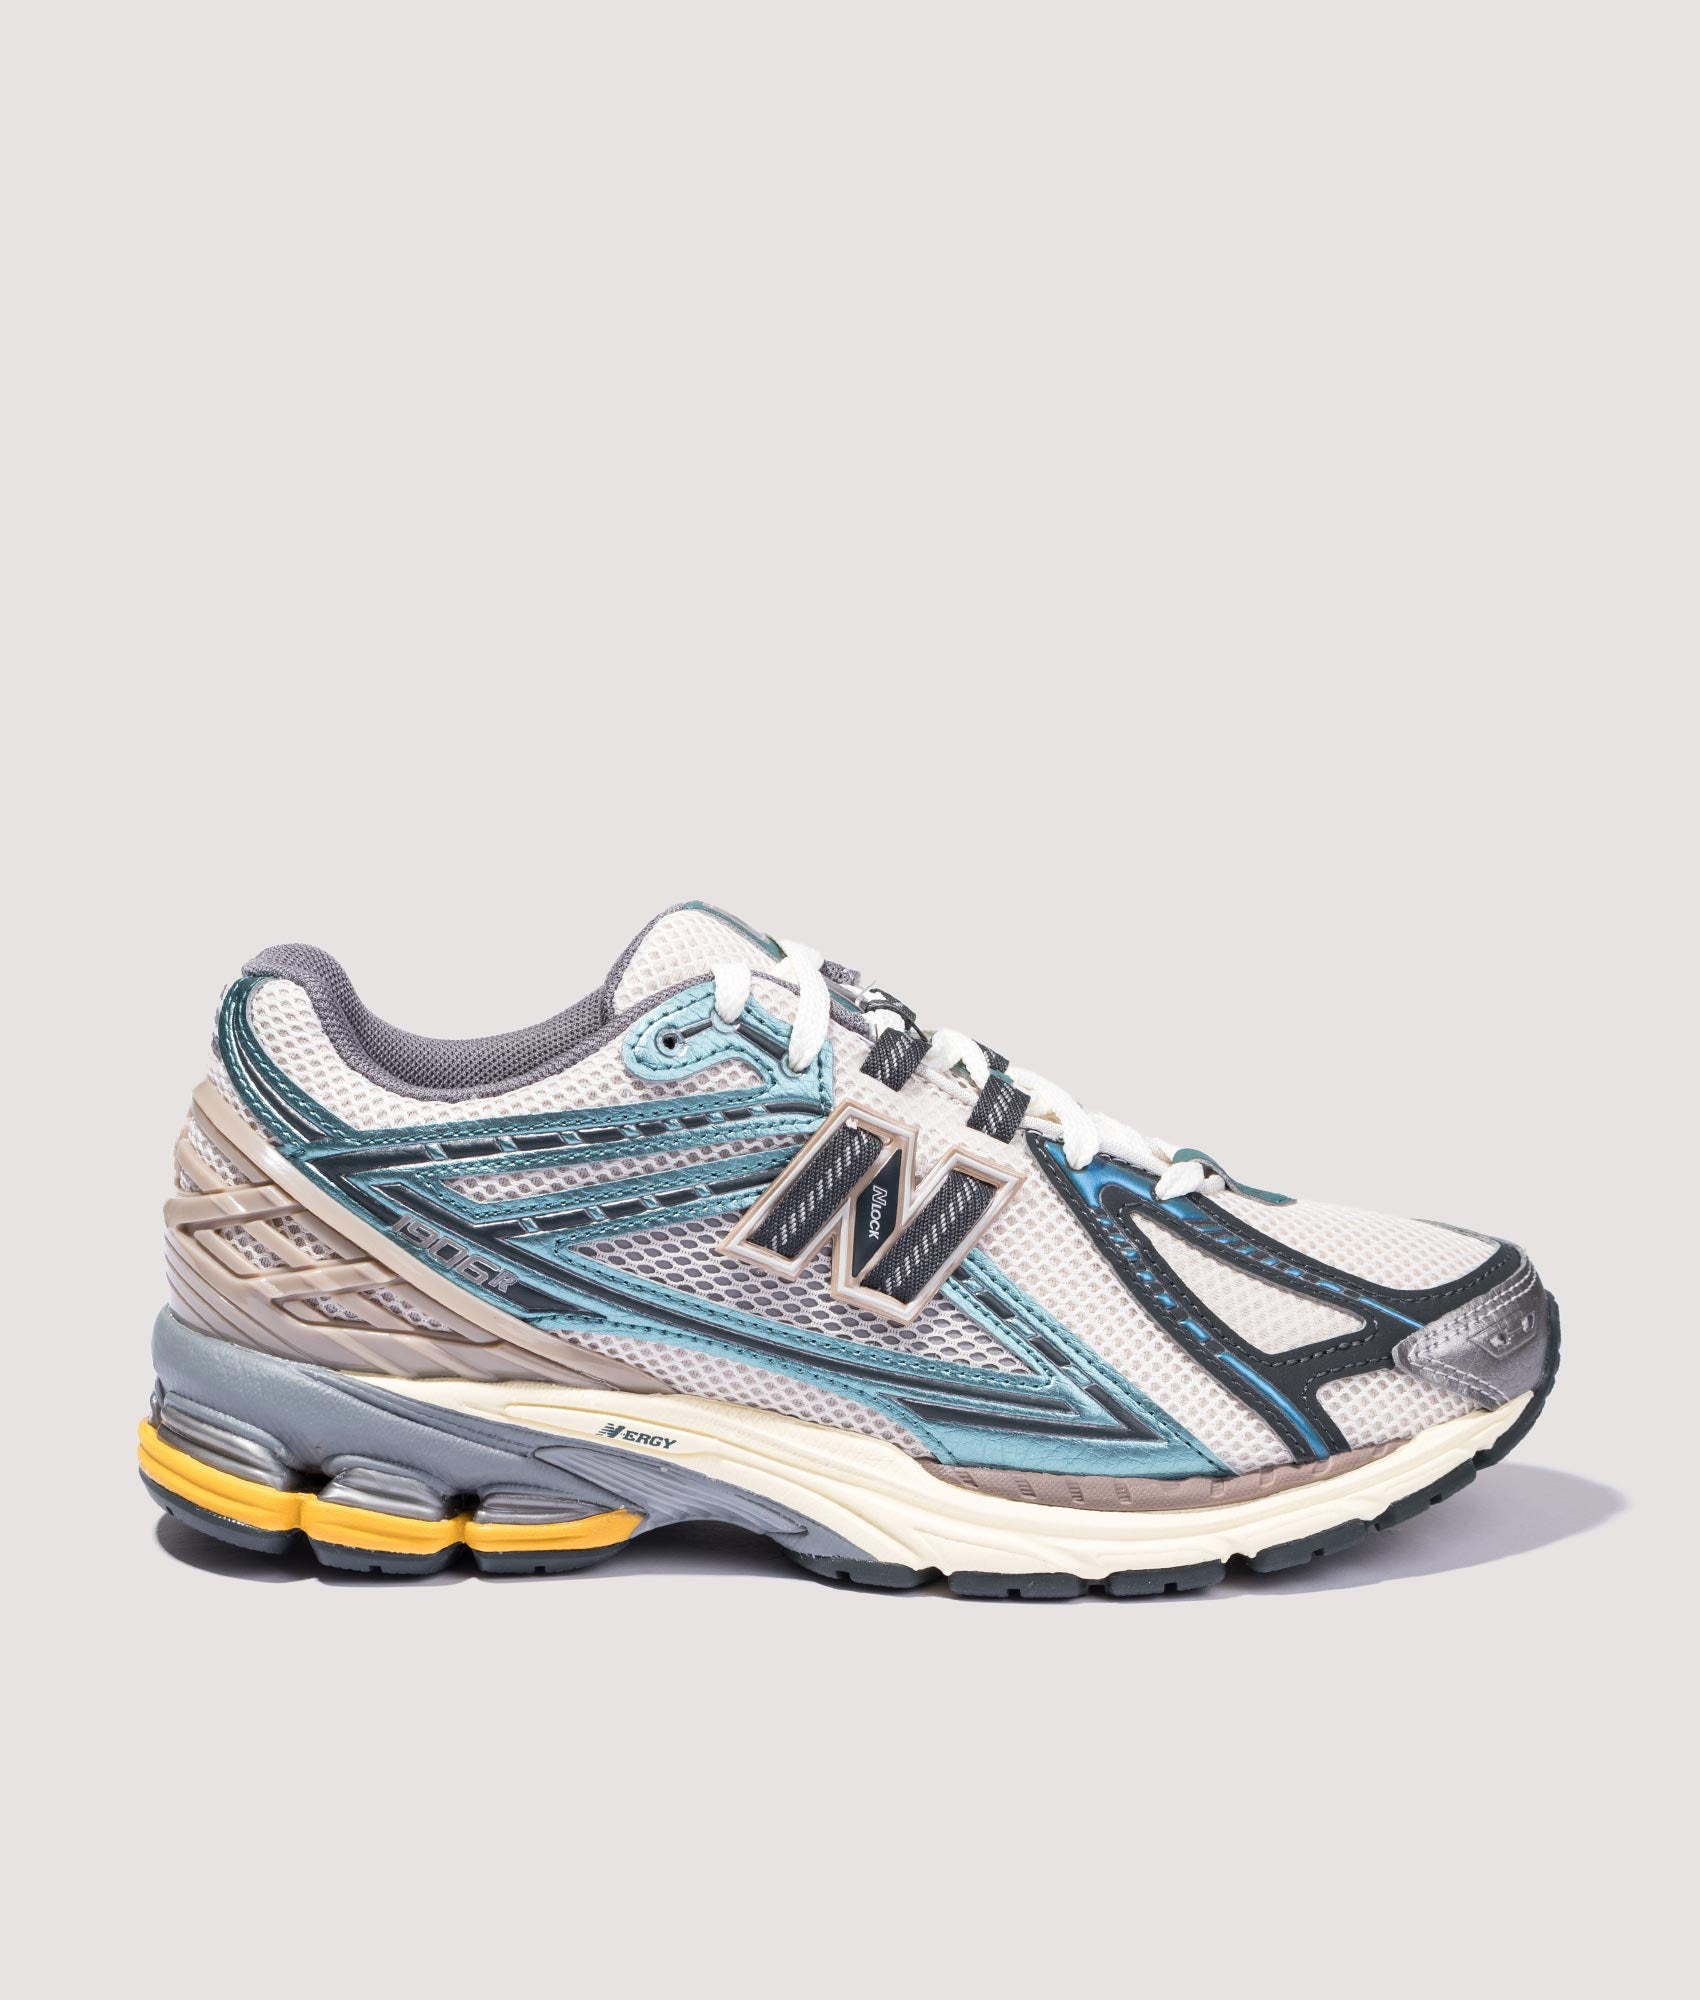 New Balance Mens 1906R Sneakers - Colour: M1906RRC New Spruce/Moonbeam/Driftwood - Size: 8.5